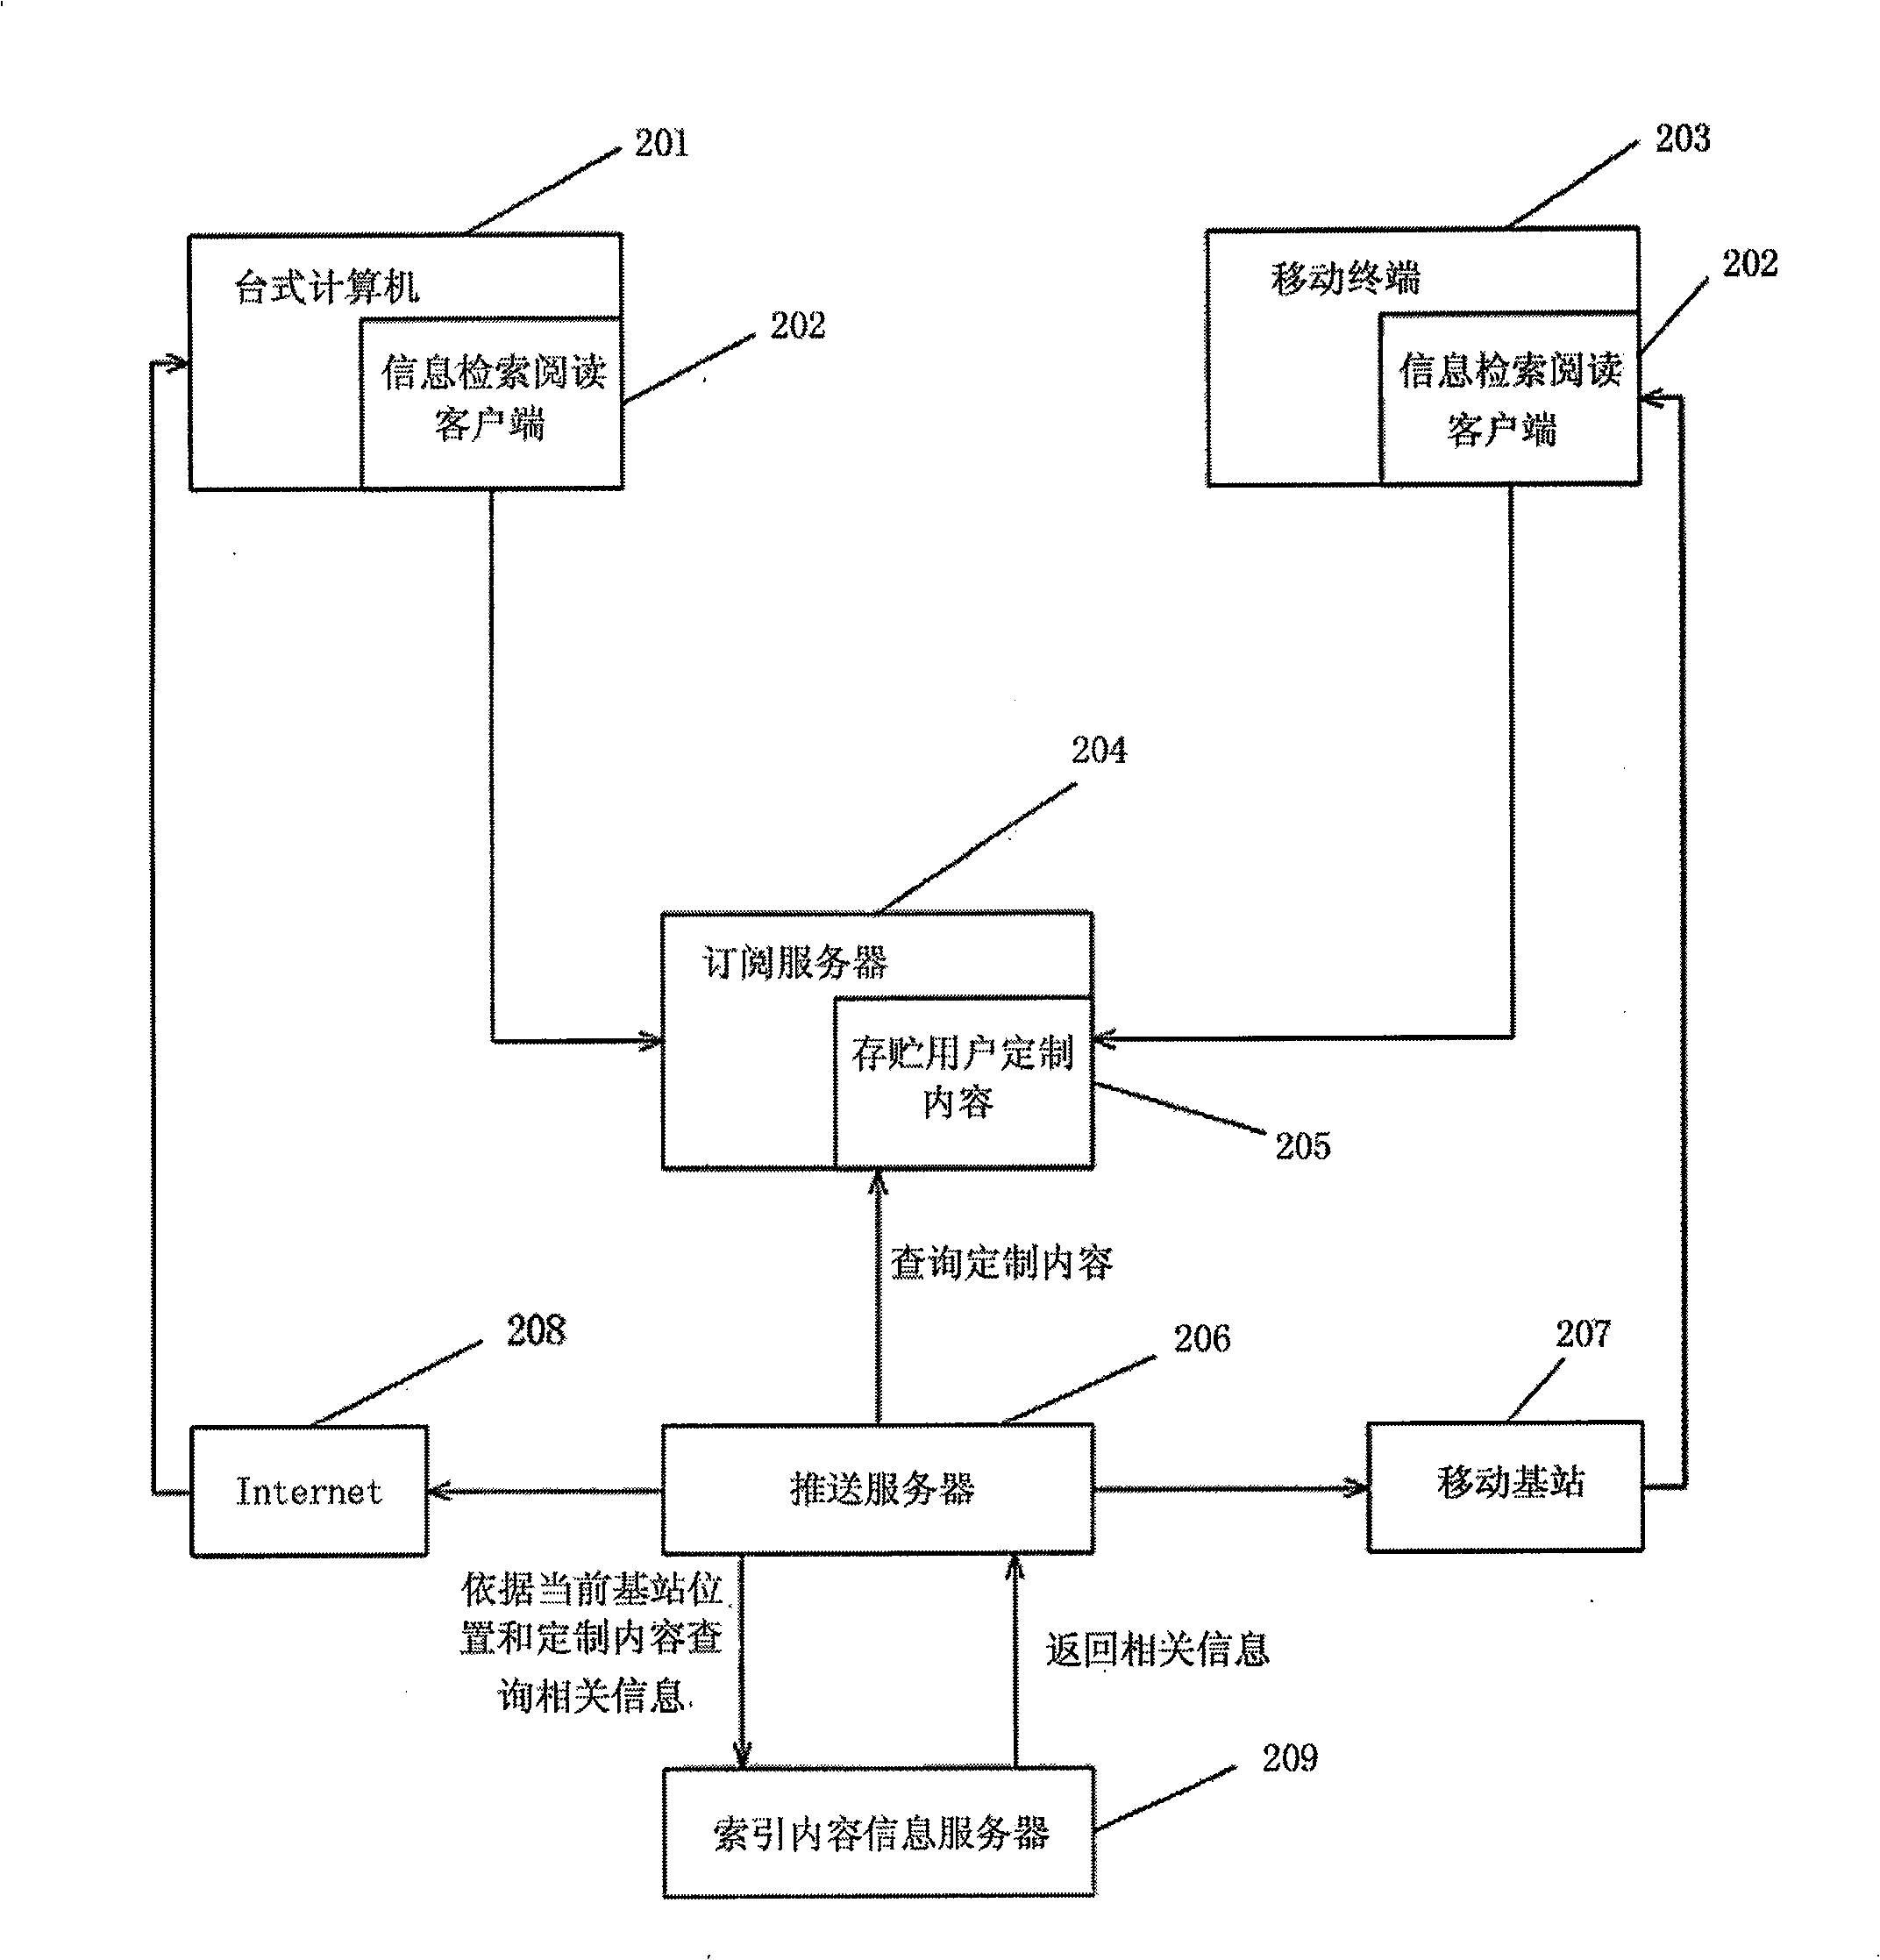 System and method for collecting, indexing, subscribing and publishing mobile terminal information